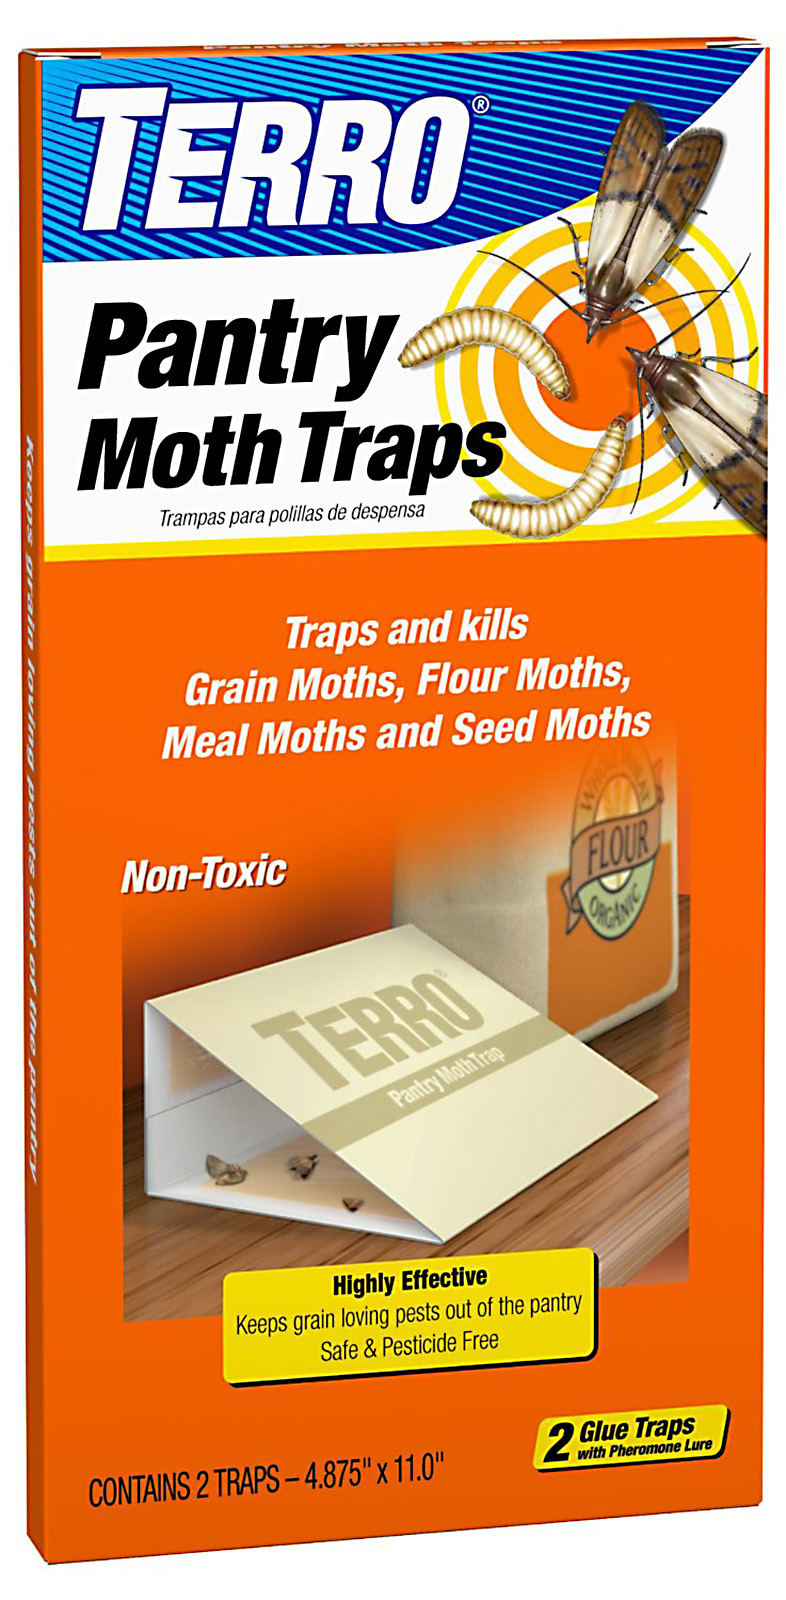 Terro Pantry Moth Trap   Outdoor Living   Pest Control   Traps